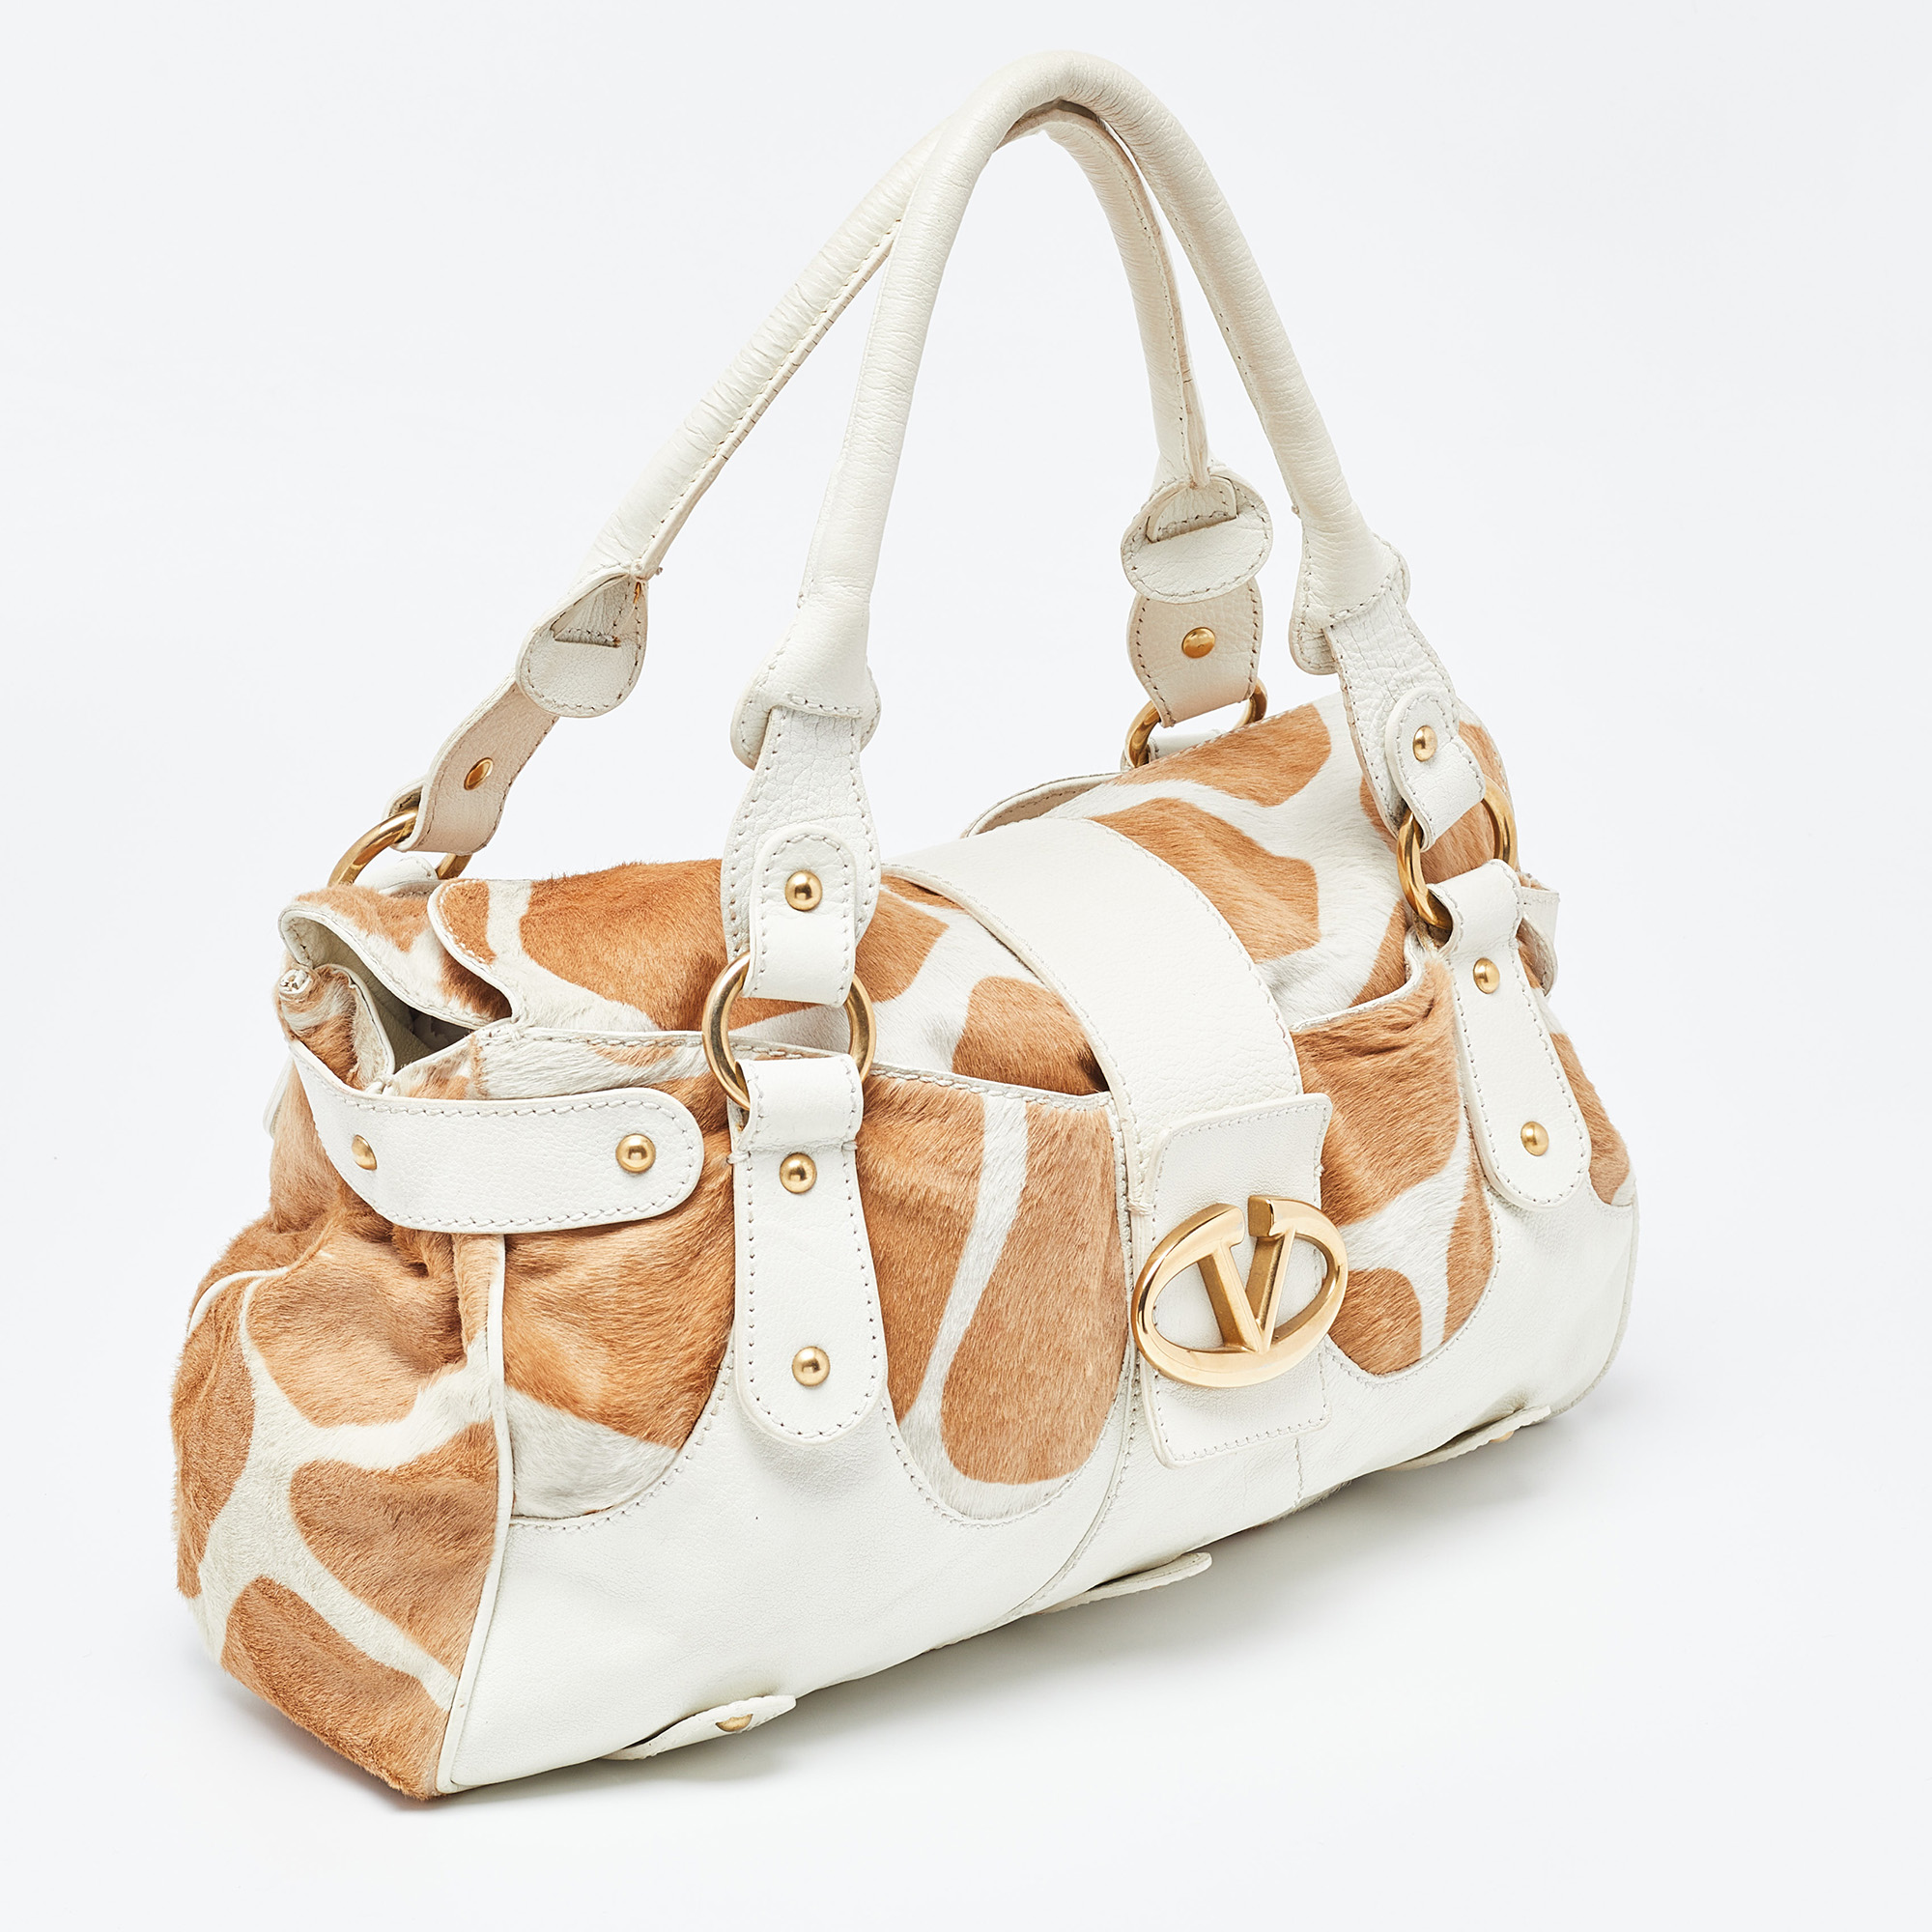 Valentino Beige/White Calfhair And Leather VLogo Satchel